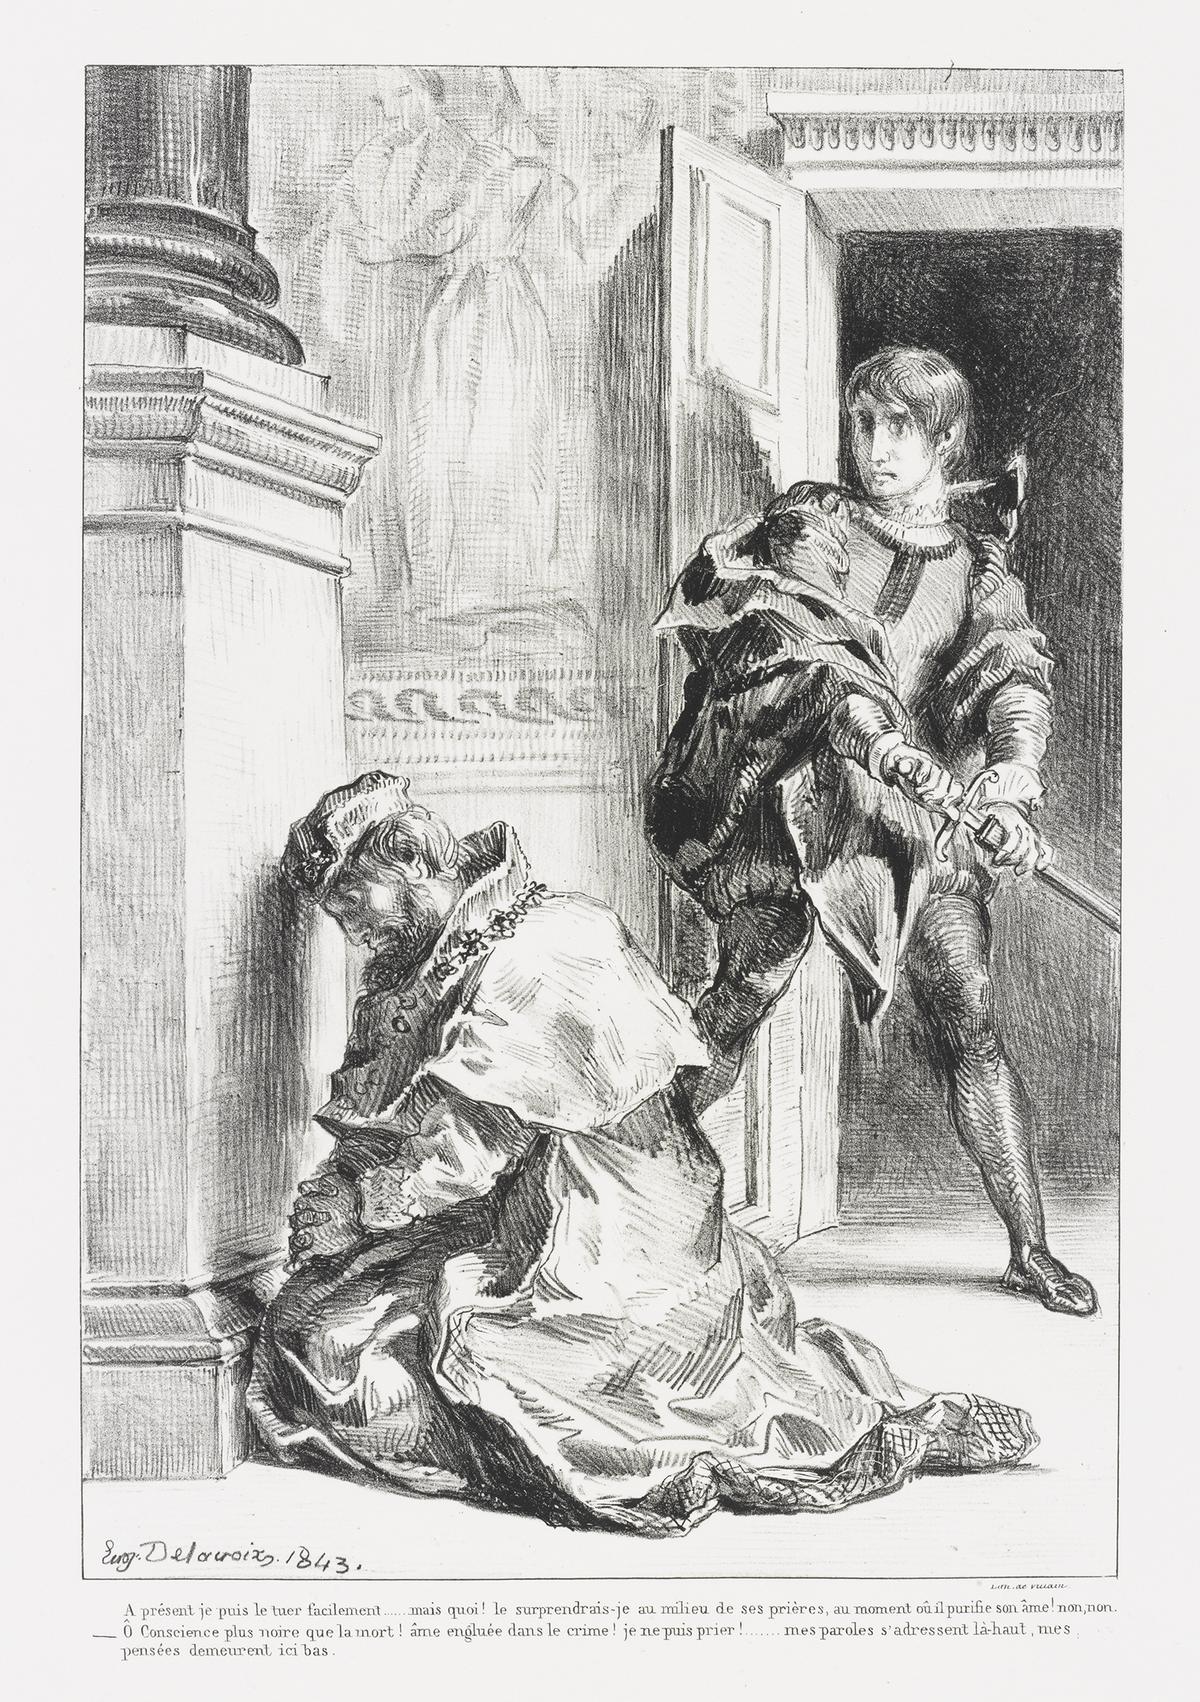 <span data-sheets-value="{"1":2,"2":"Hamlet attempts to kill the king in Act III, Scene iii. Lithograph, 1843, by Eugène Delacroix. Yale University Art Gallery, Yale. (Public Domain)"}" data-sheets-userformat="{"2":8963,"3":{"1":0},"4":{"1":2,"2":2228223},"11":4,"12":0,"16":12}">Hamlet attempts to kill the king in Act III, Scene iii. Lithograph, 1843, by Eugène Delacroix. Yale University Art Gallery, Yale. (Public Domain)</span>